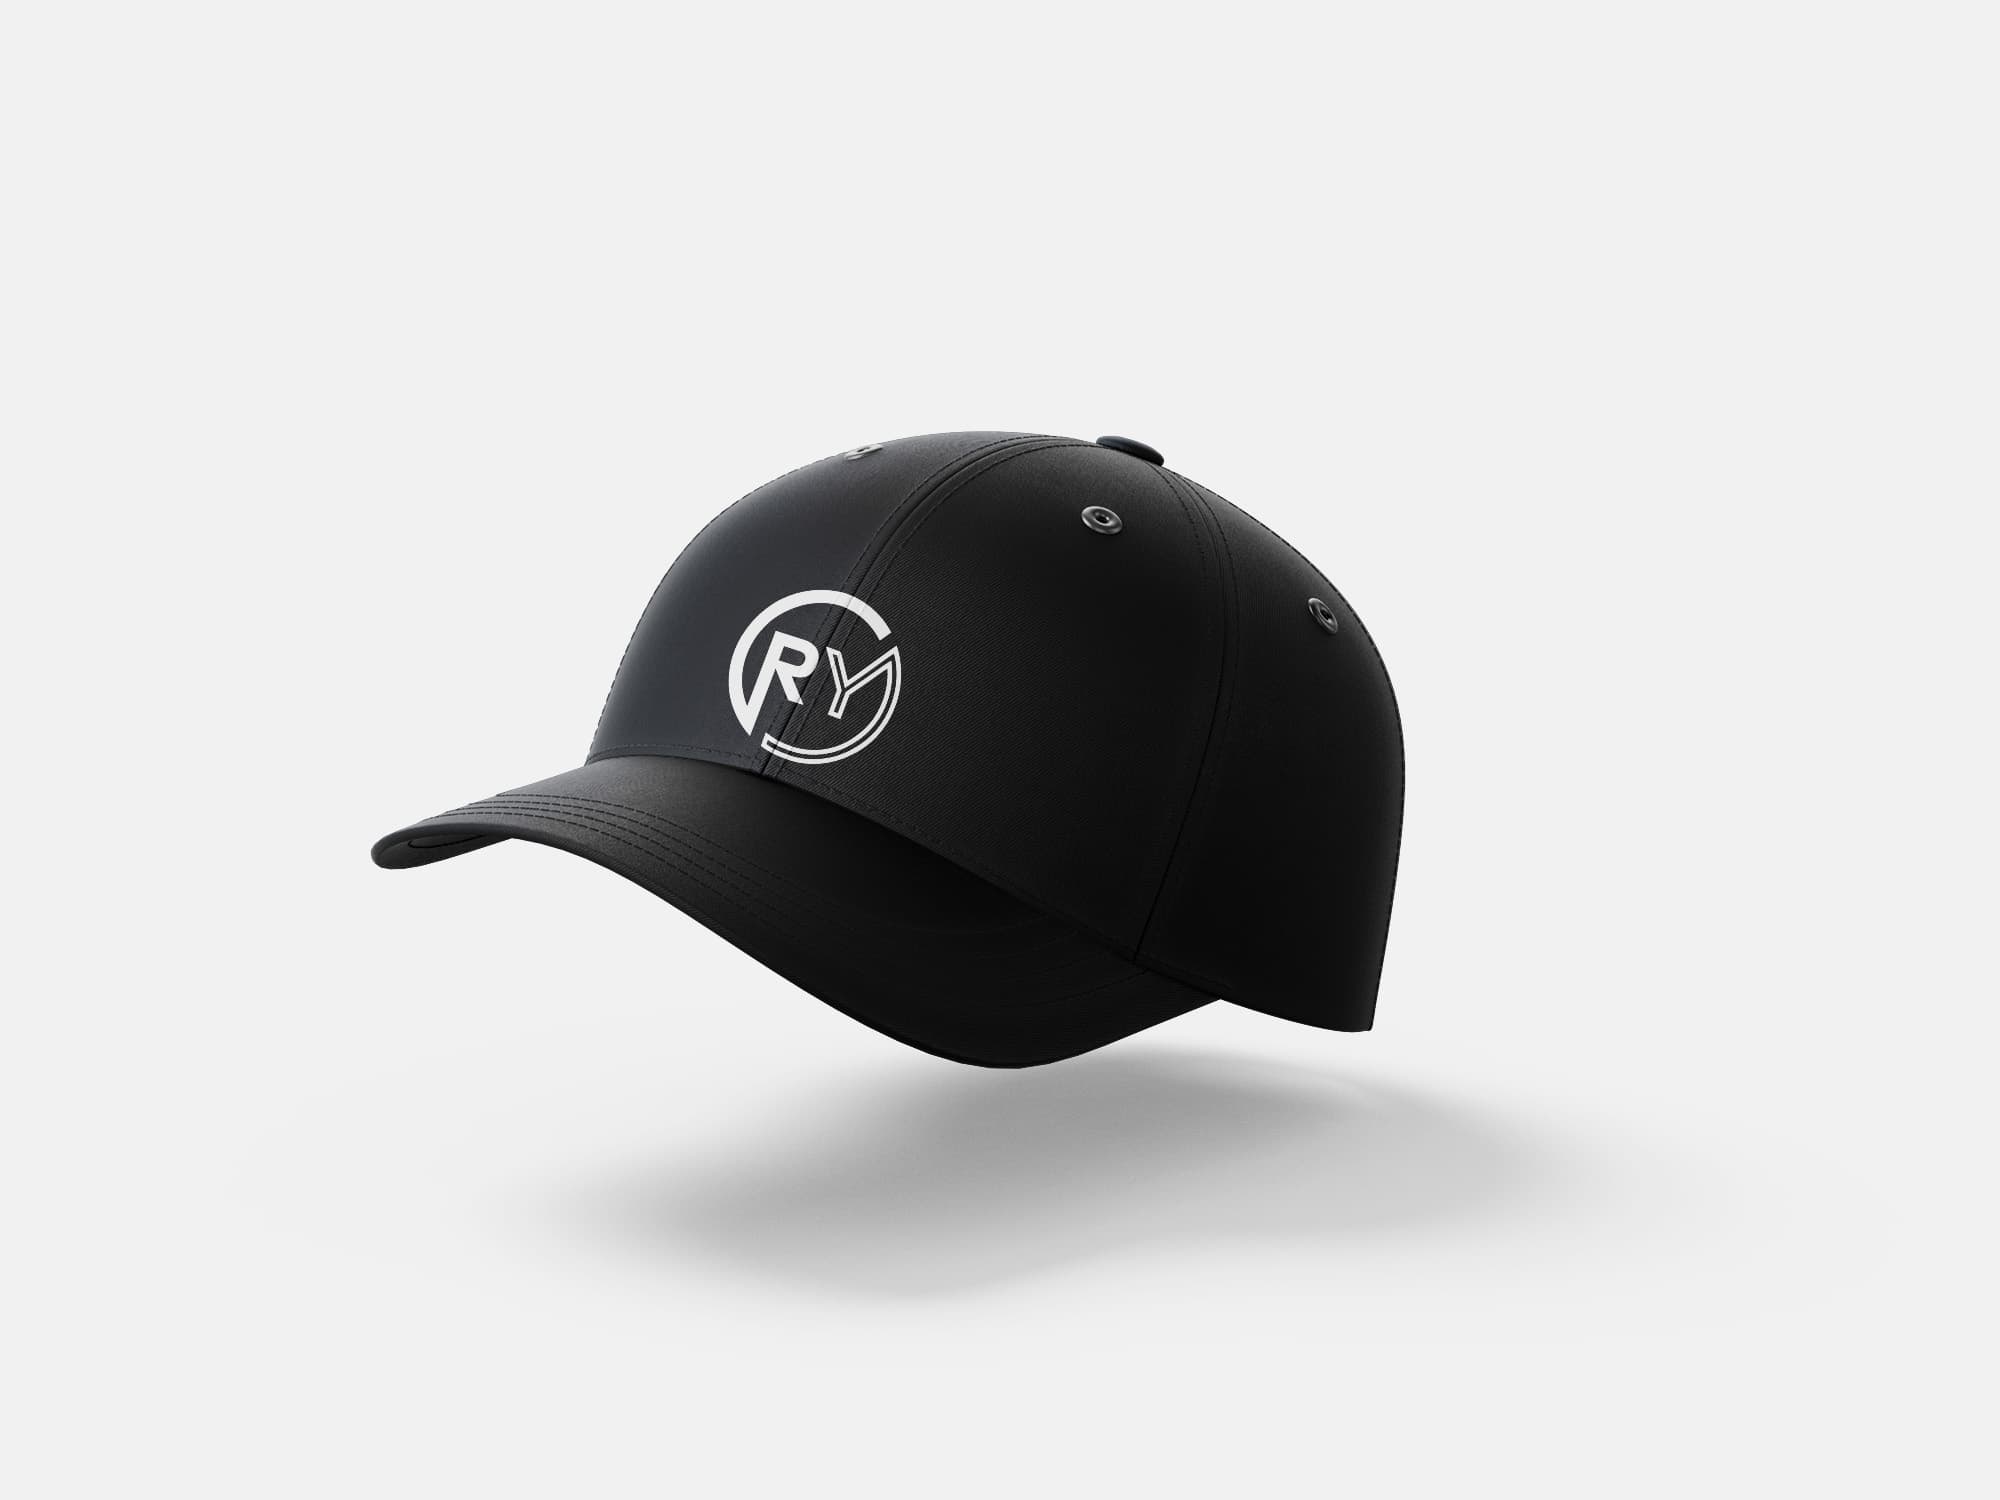 Logo for One Church's youth group, 'Real Youth', presented on a baseball cap mockup.